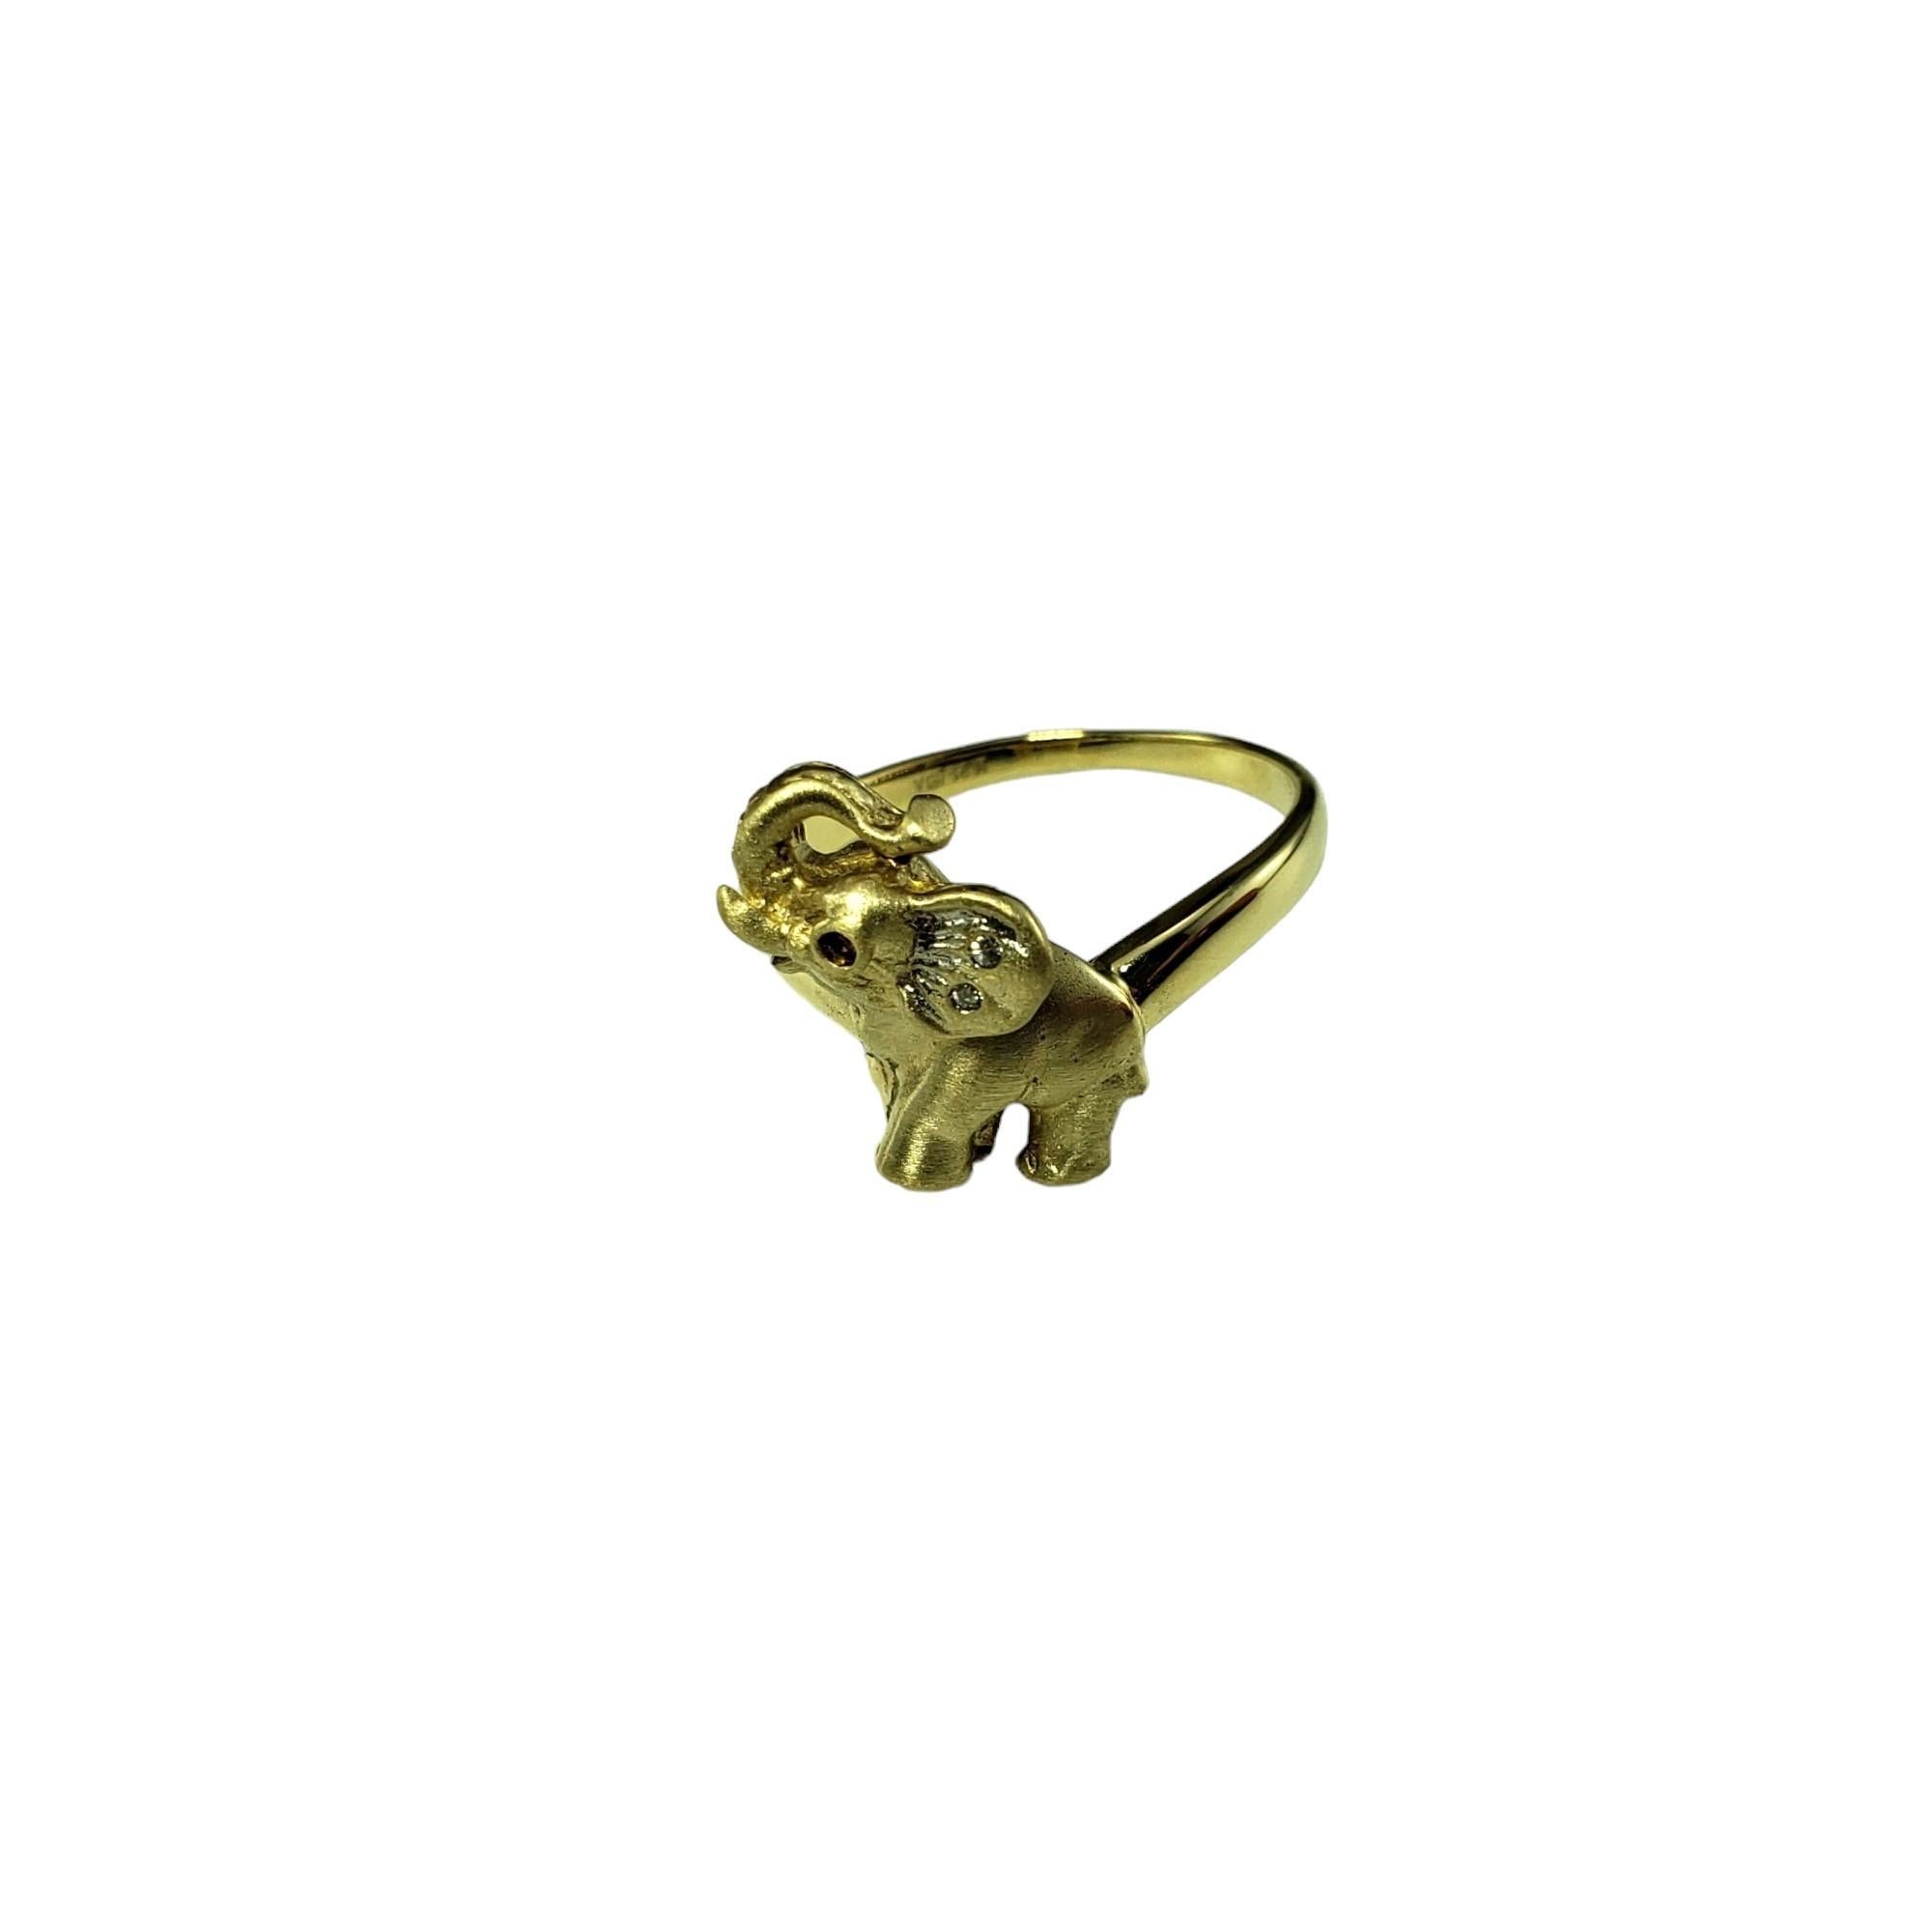 Vintage 14 Karat Yellow Gold and Diamond Elephant Ring Size 7-

This lovely elephant ring features one faceted red stone and two round brilliant cut diamonds set in beautifully detailed 14K yellow gold.  

Width:  14 mm.  Shank: 1.5 mm.

Approximate